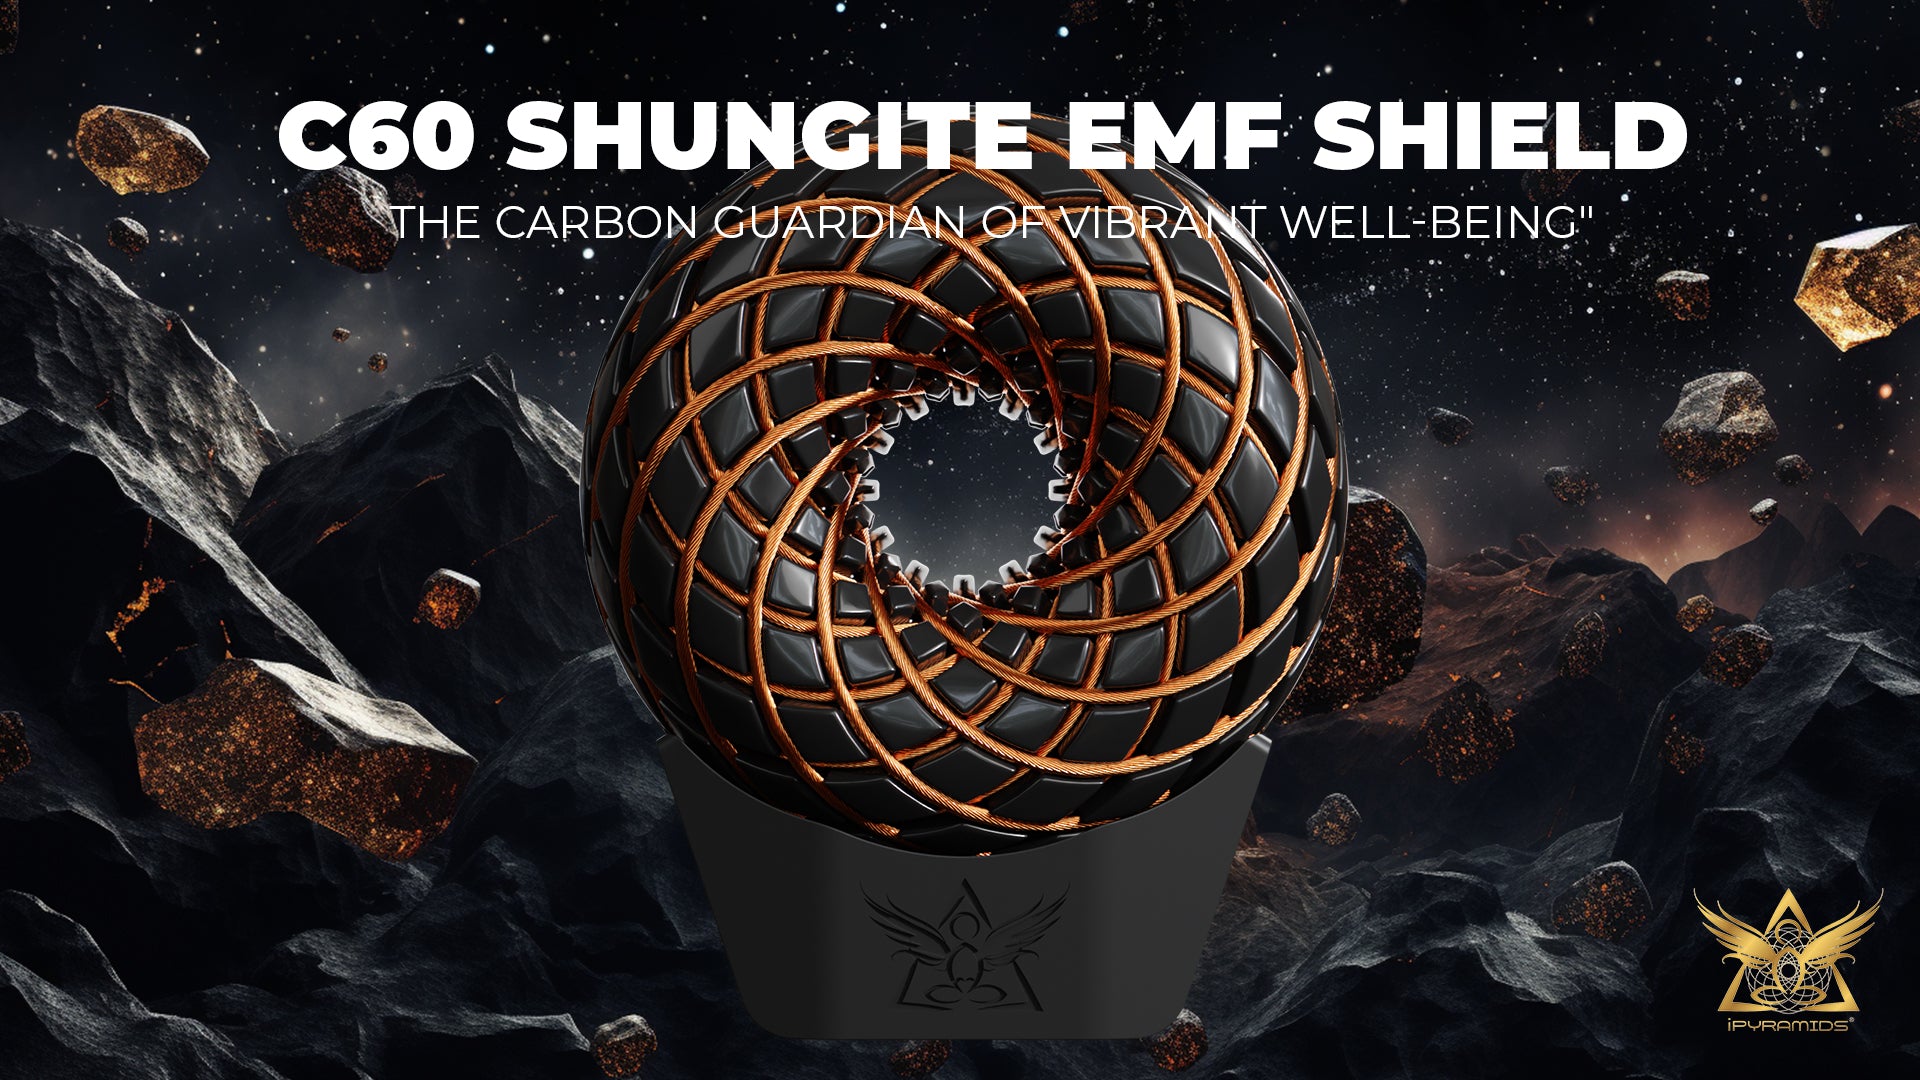 C60 Shungite EMF Shield: The Carbon Guardian of Vibrant Well-being